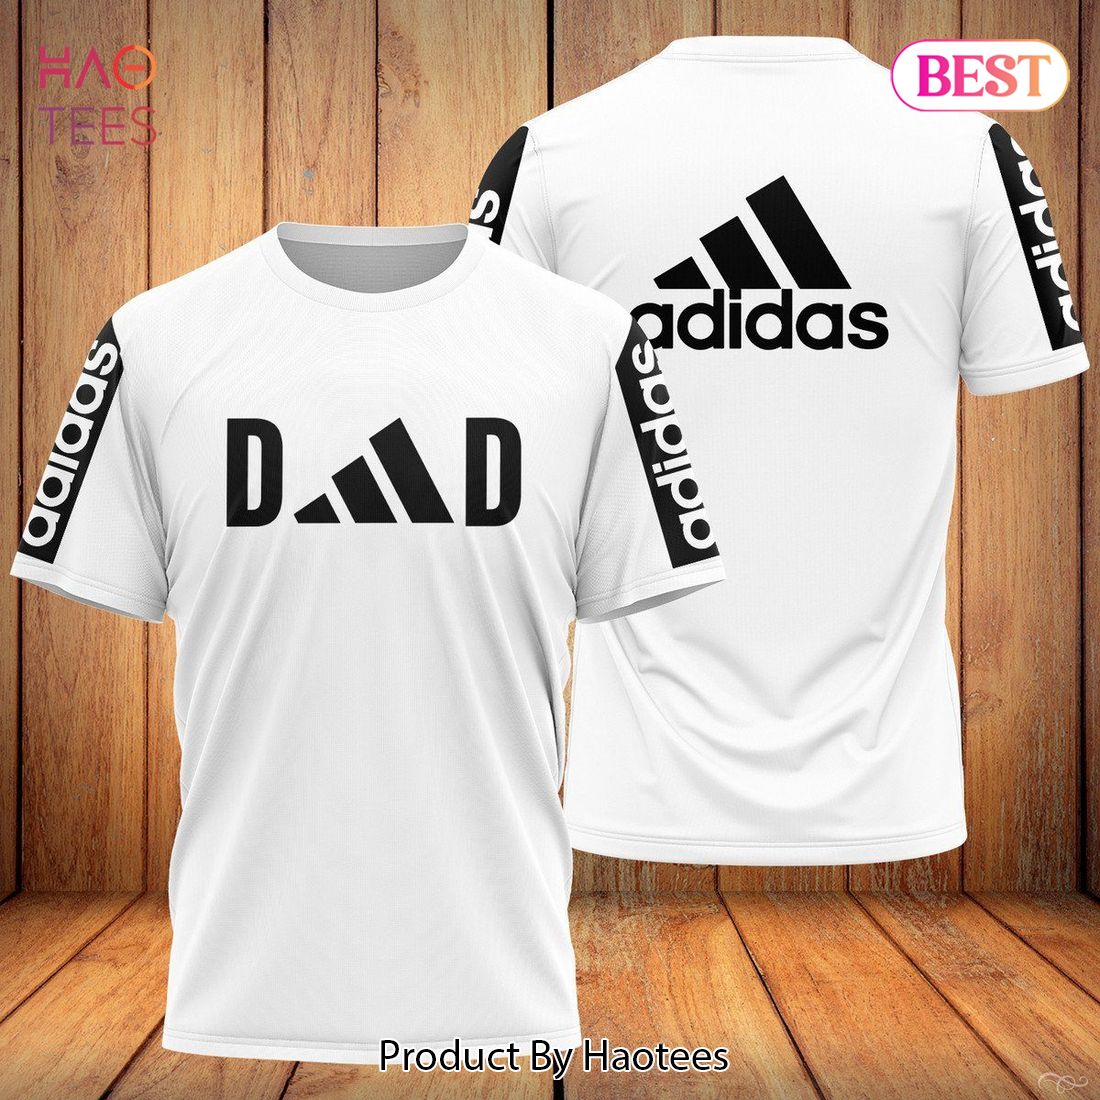 Adidas 3D T-Shirt Full White Color Limited Edition